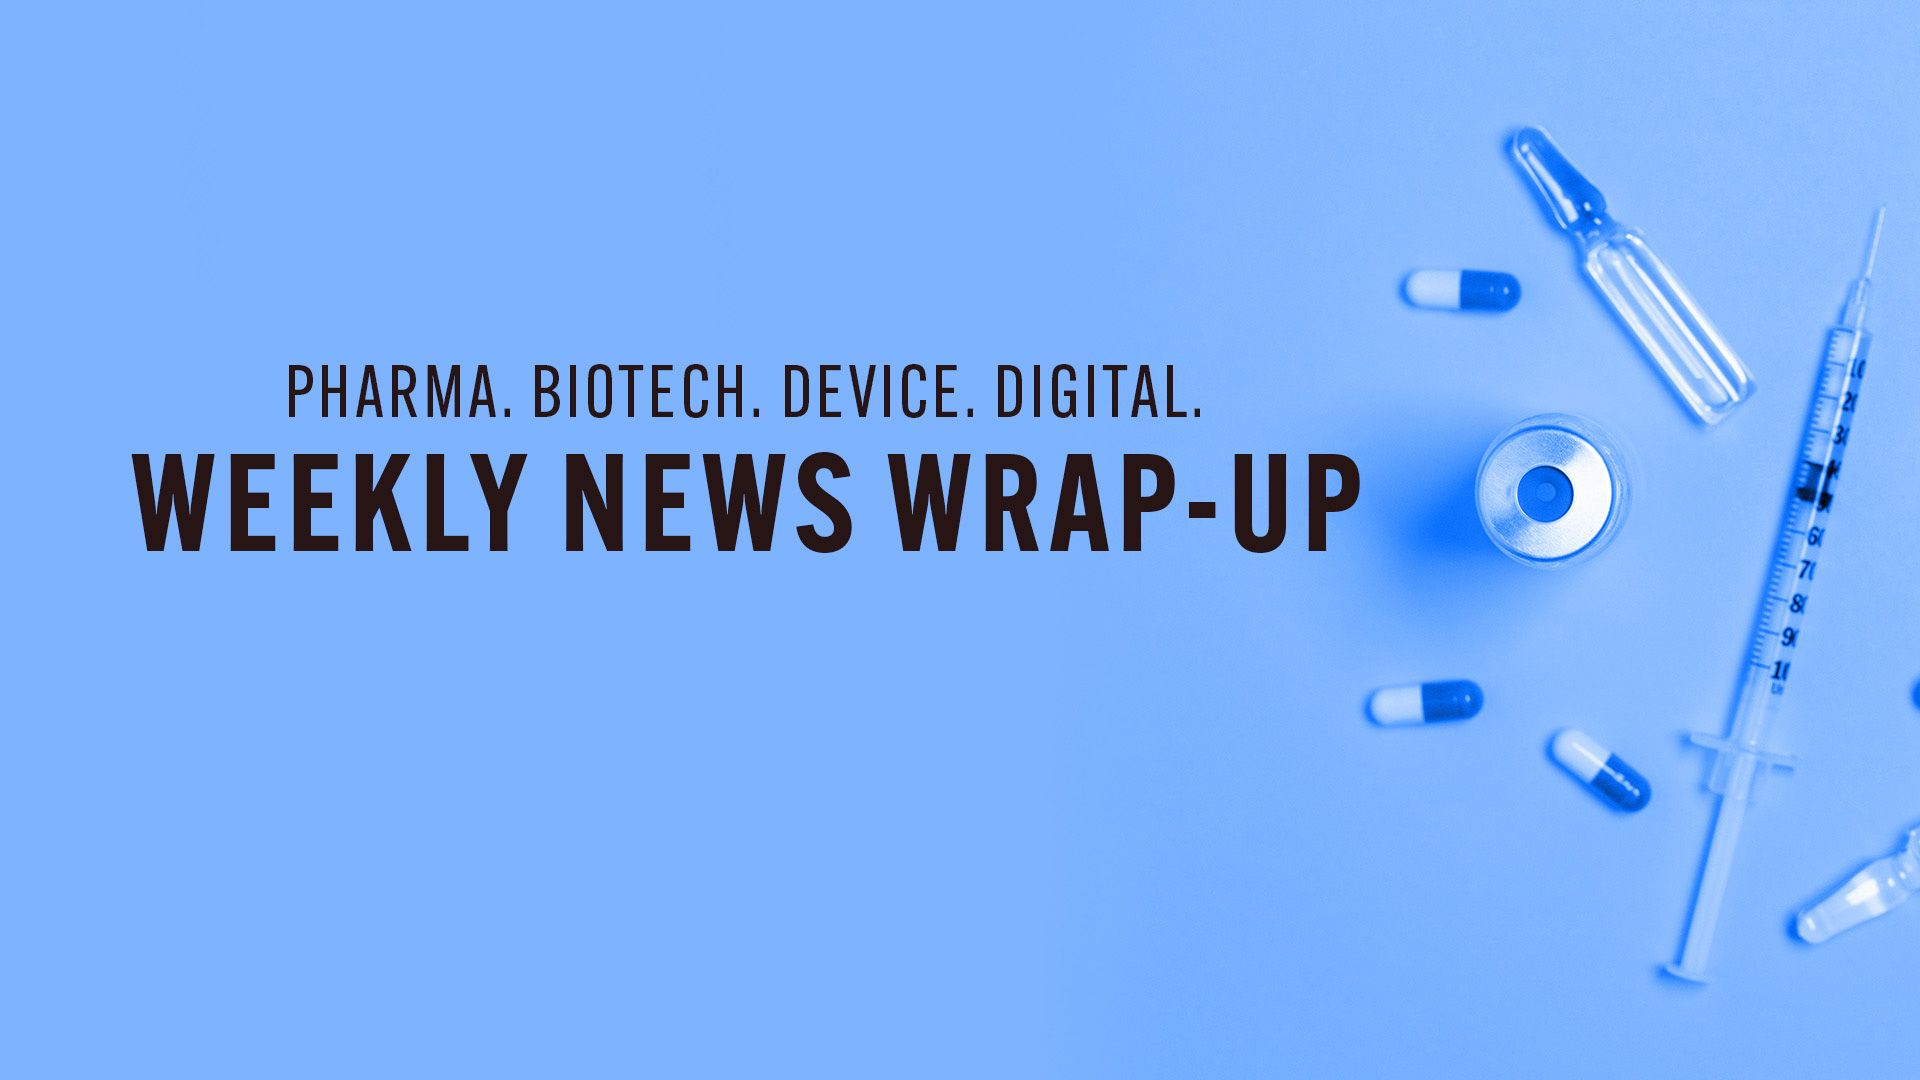 Healthcare Industry News Weekly Wrap-Up: November 11, 2022